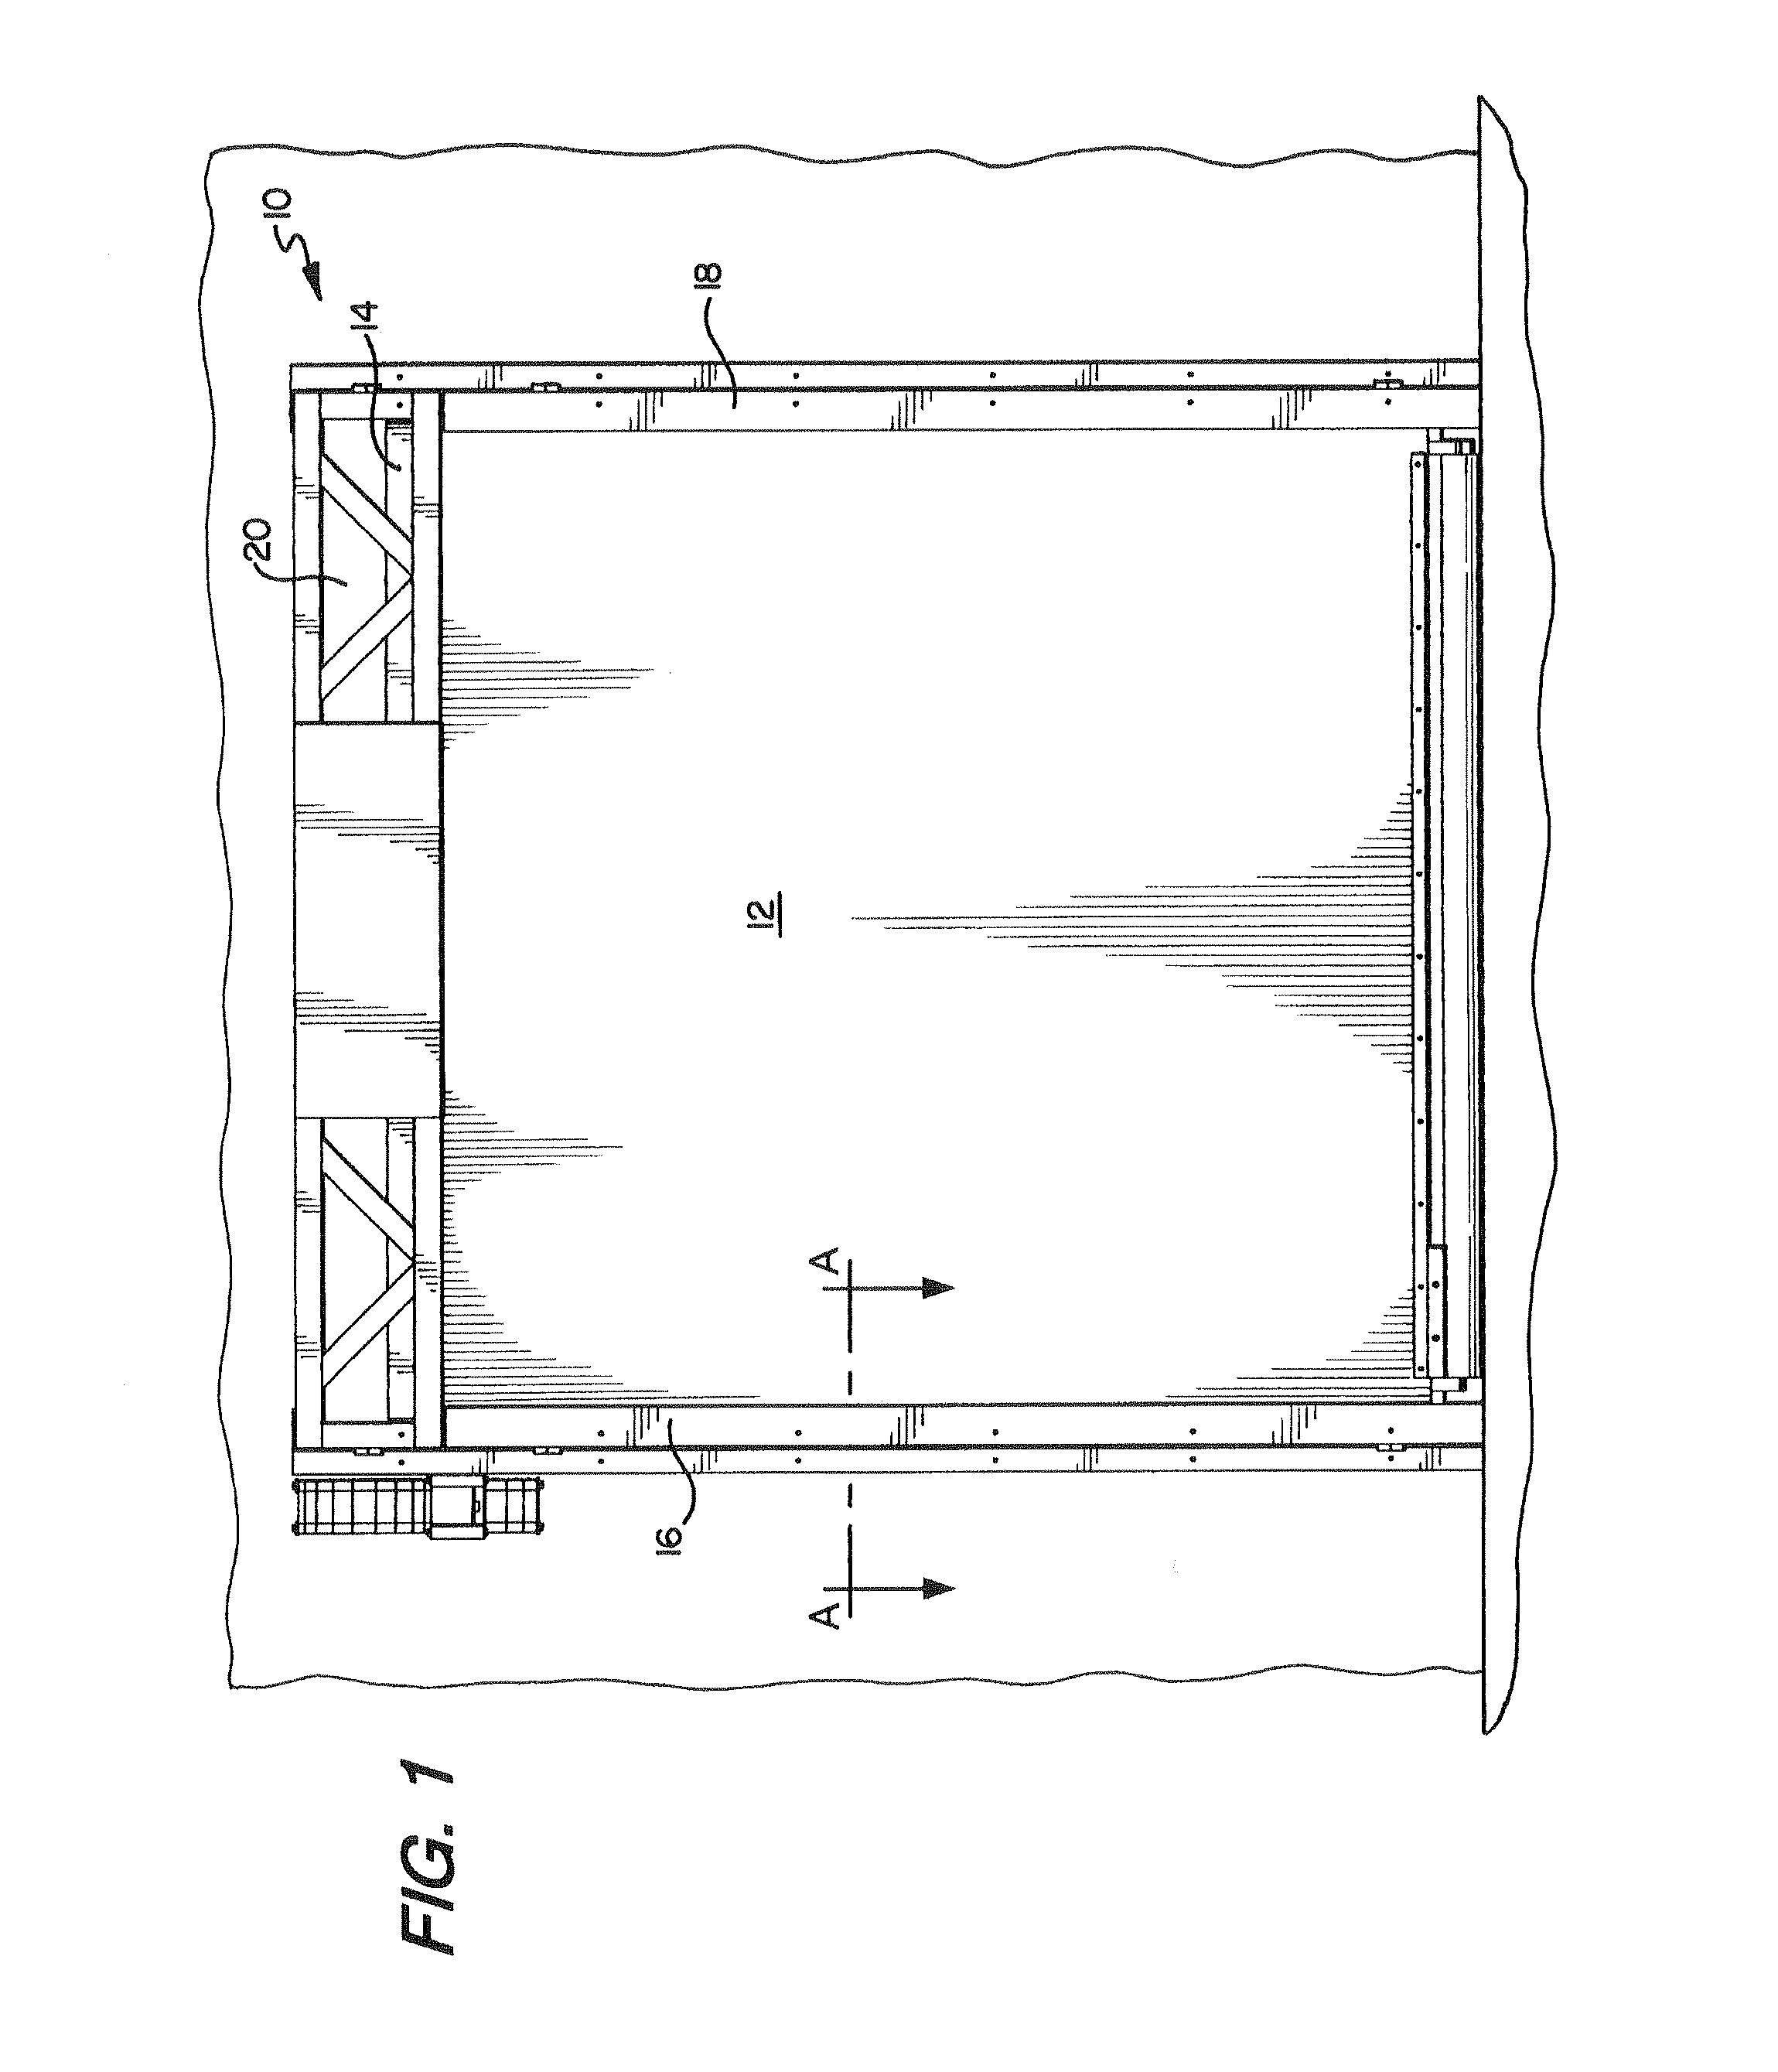 Segmented wind lock configuration for overhead roll-up doors and method of constructing the same